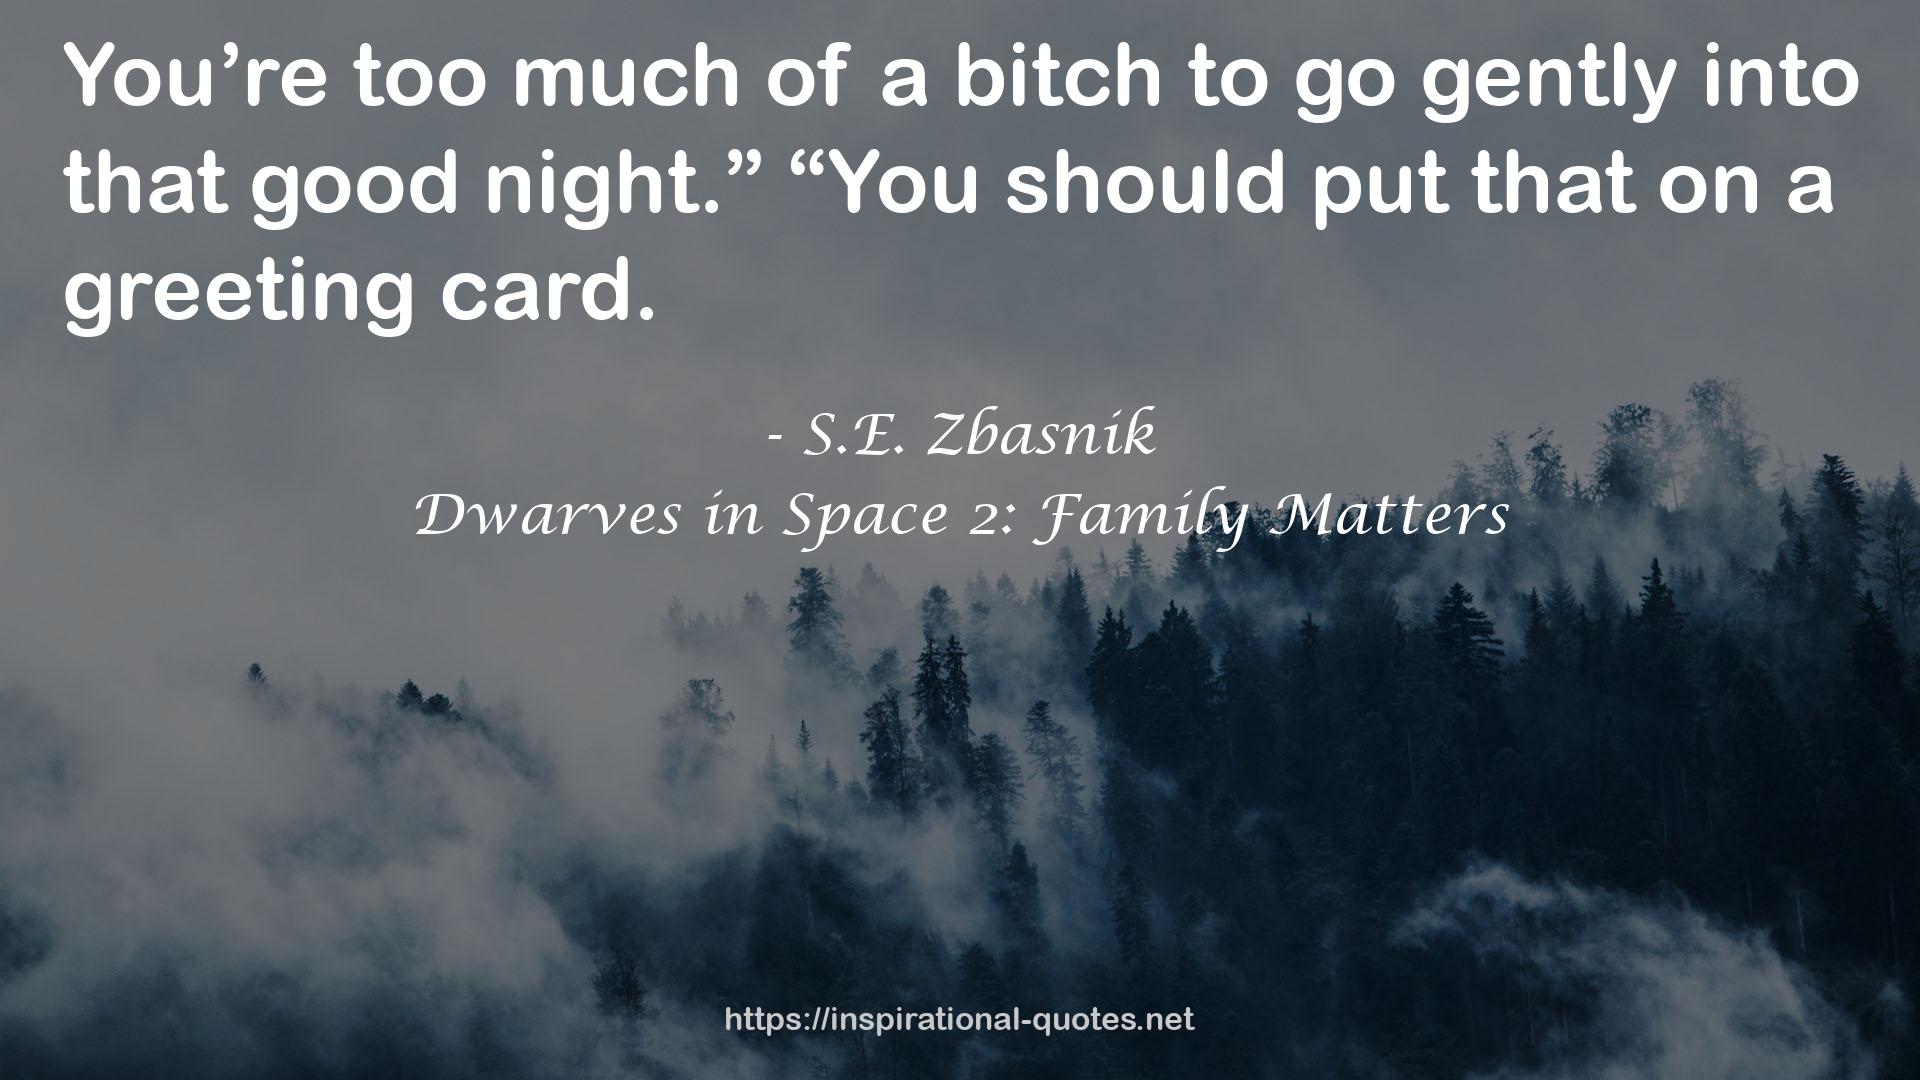 Dwarves in Space 2: Family Matters QUOTES